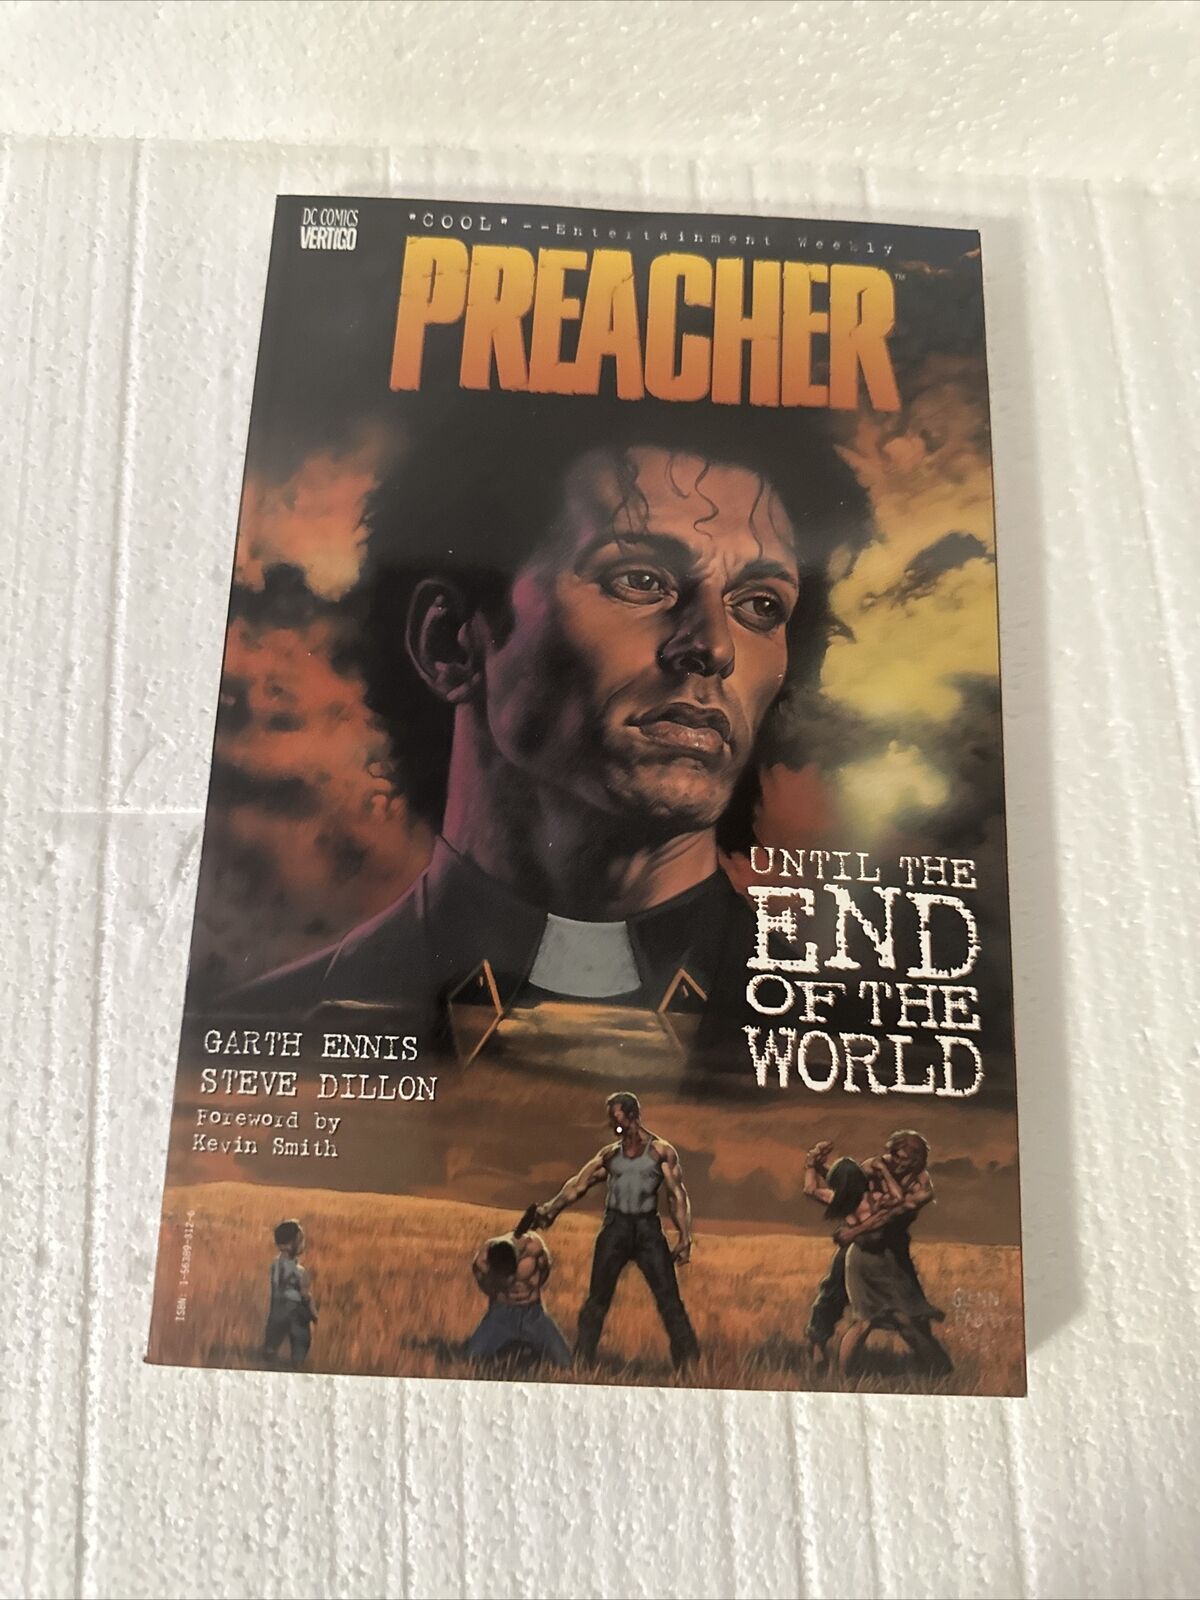 Preacher Vol 2 Until the End of the World TP New Unread first printing